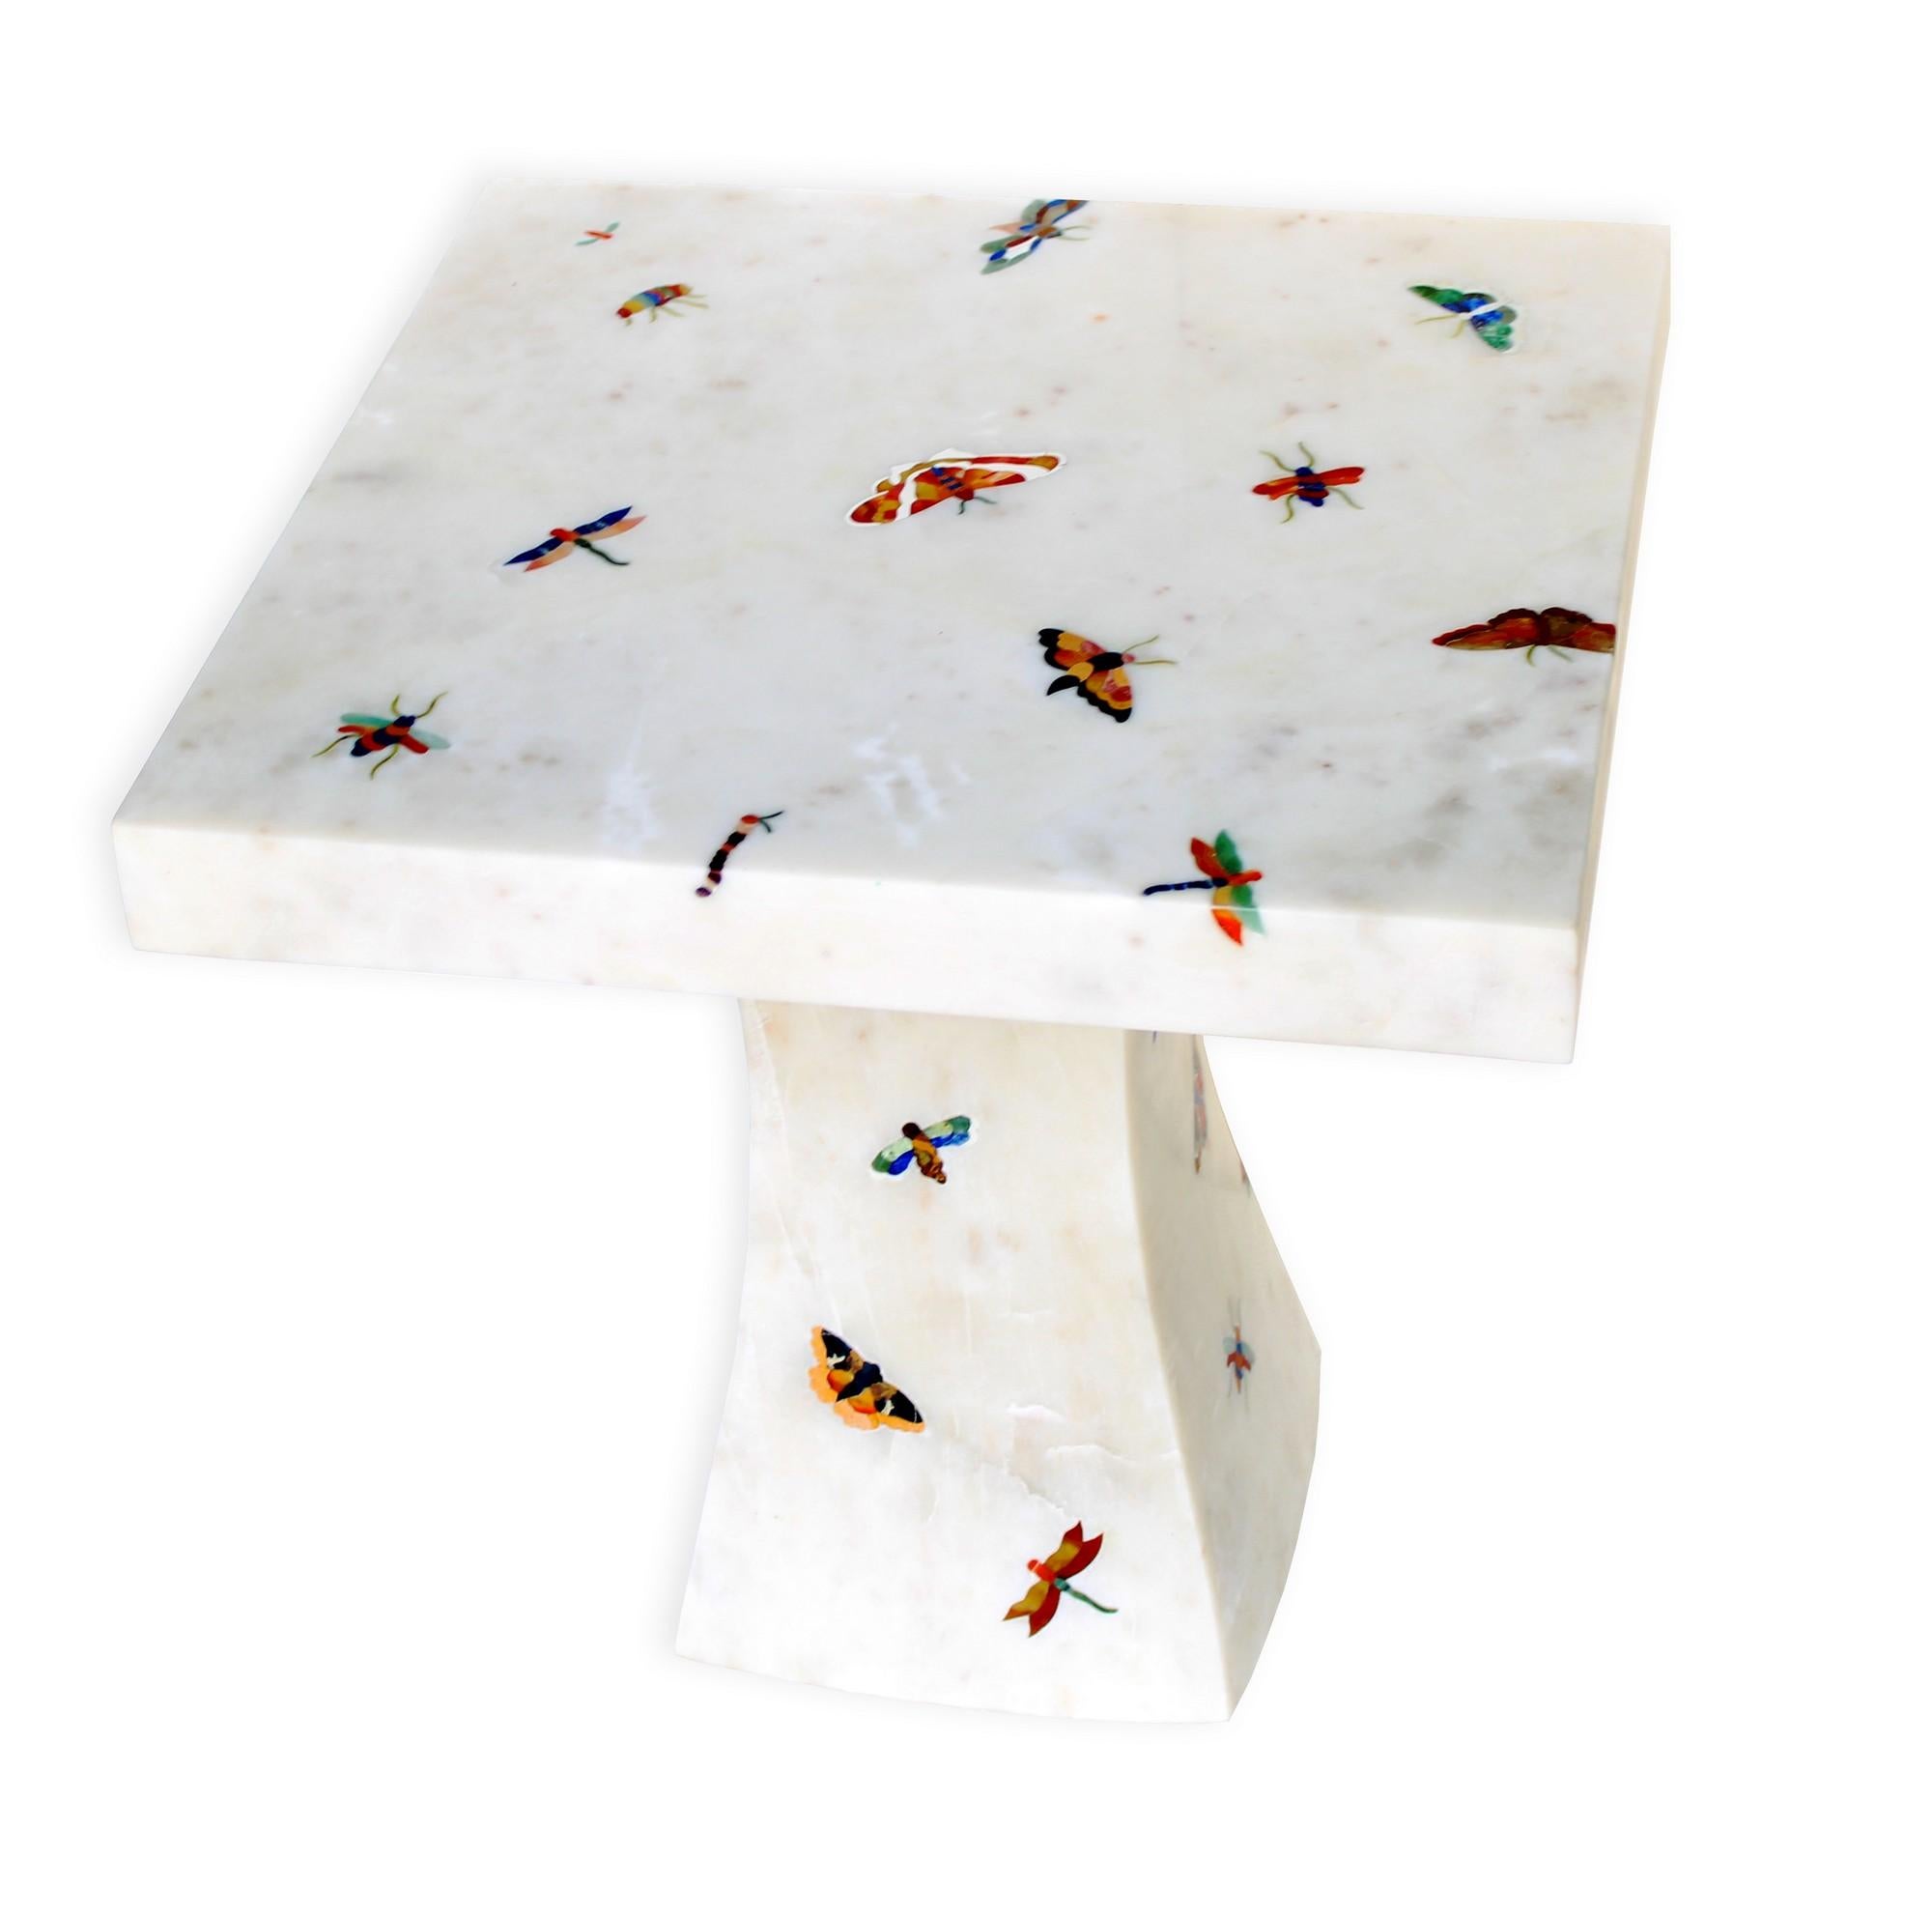 American Butterfly Inlay Table In White Marble Handcrafted in India By Stephanie Odegard For Sale